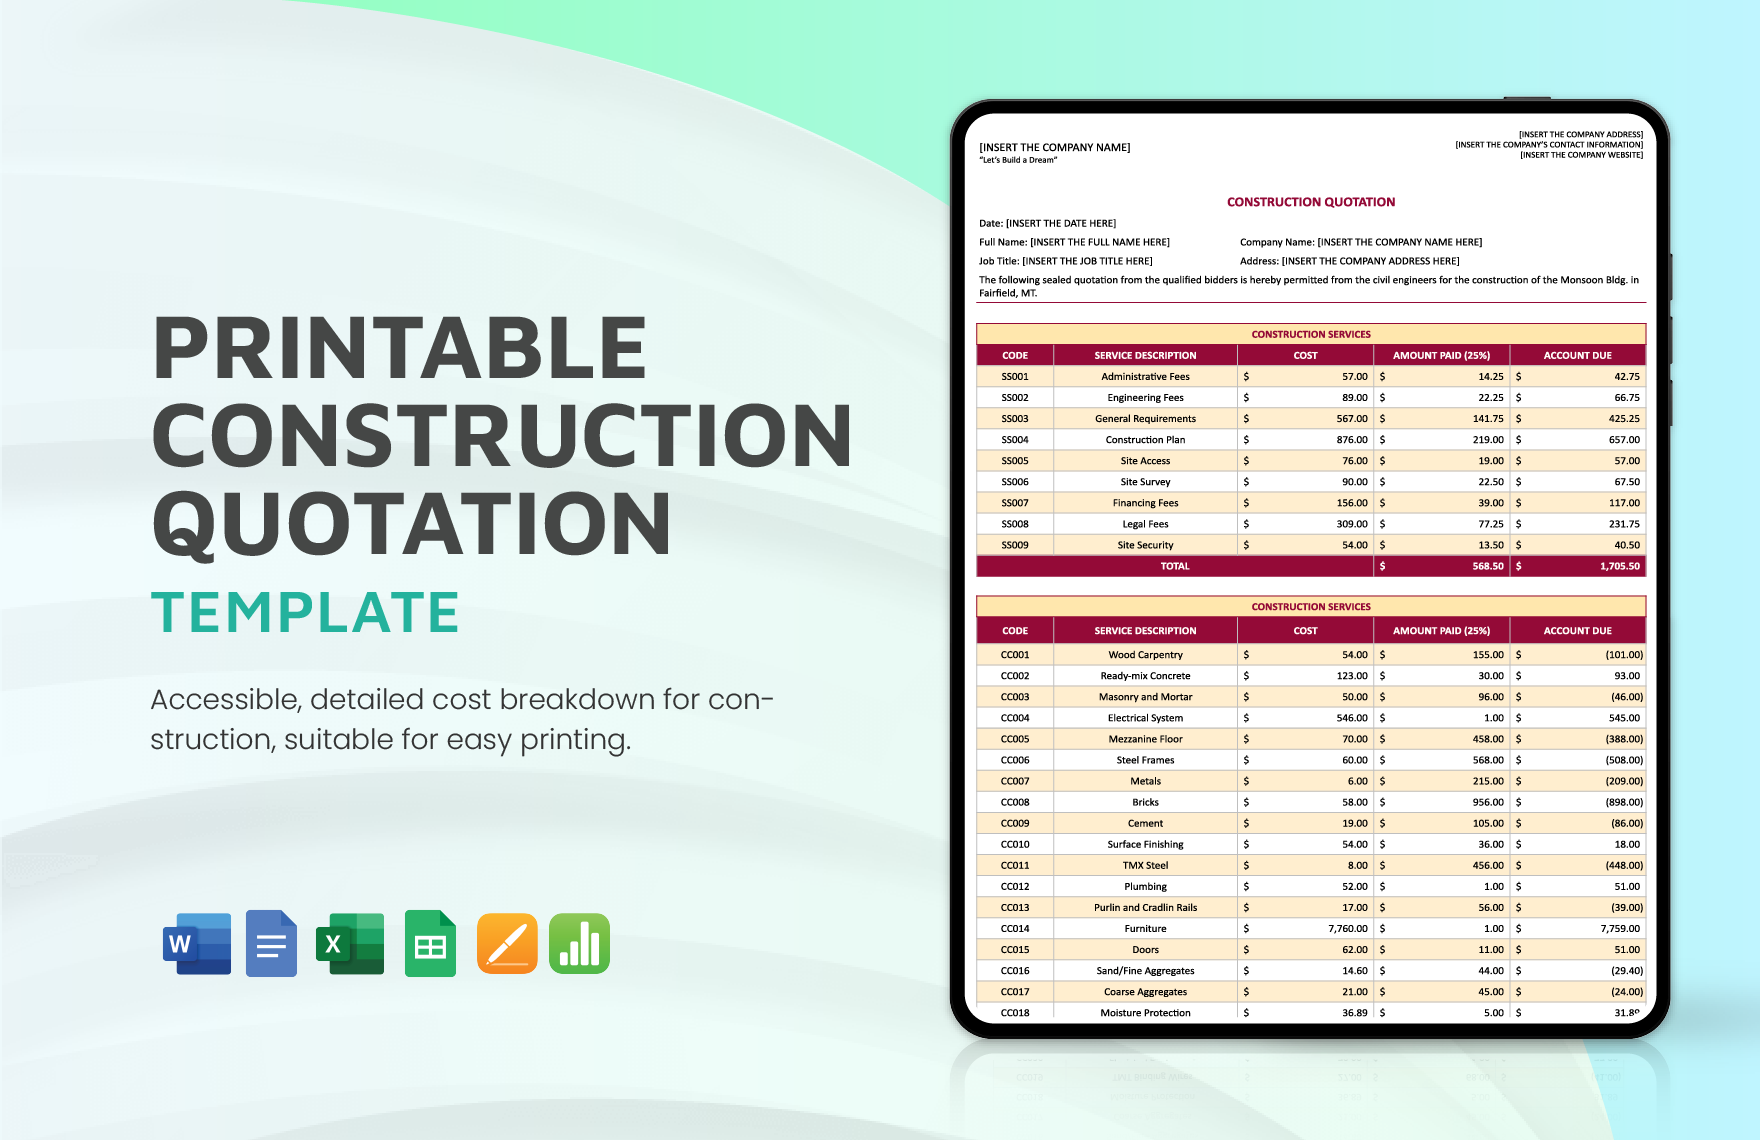 Printable Construction Quotation Template in Word, Google Docs, Excel, Google Sheets, Apple Pages, Apple Numbers